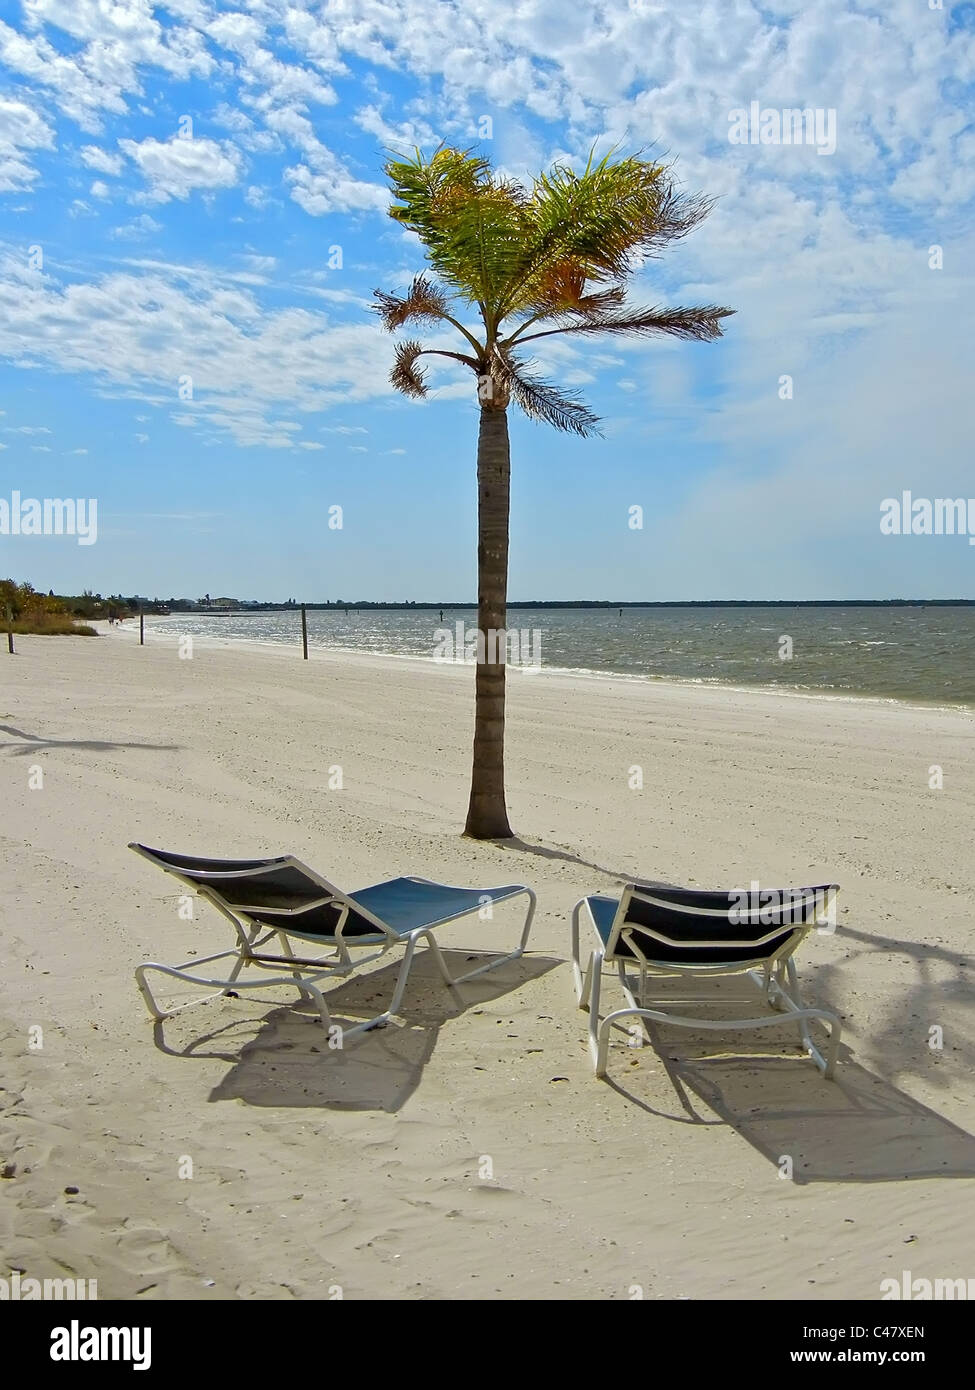 Two chairs on a beach with palm tree Fort Myers Beach Florida Stock Photo